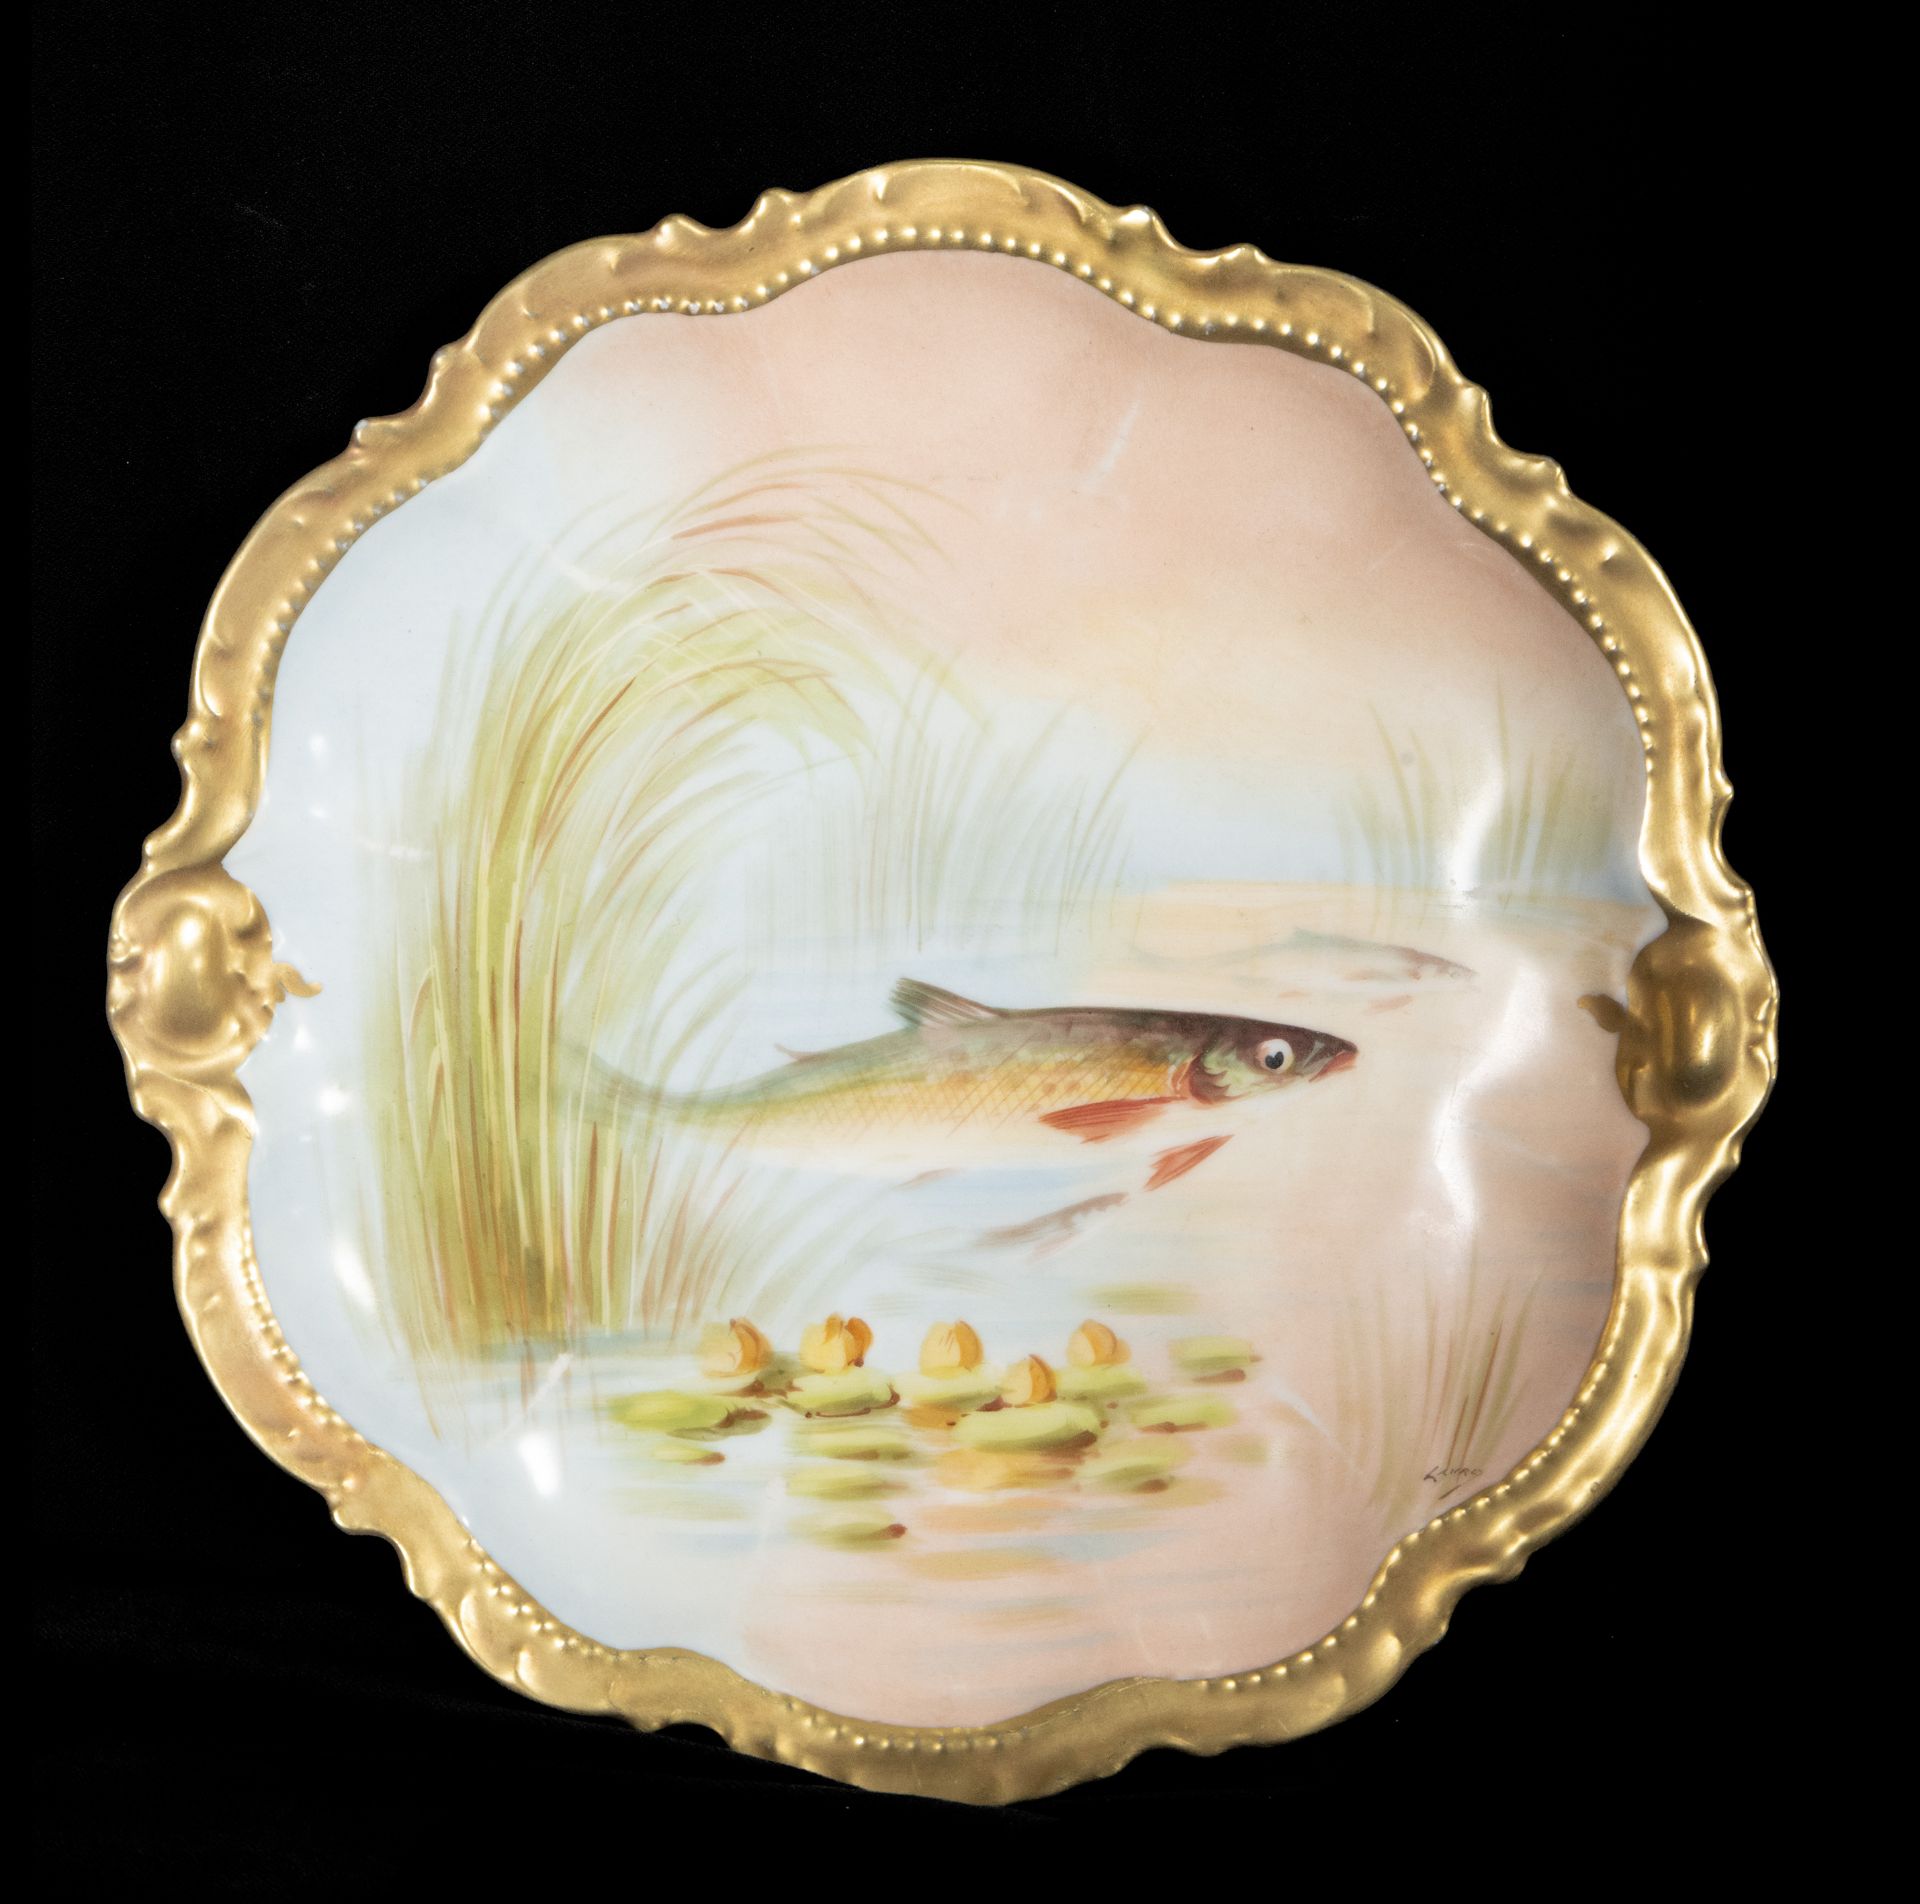 19th Century Limoges Porcelain Fish Dinnerware Set by the Count of Artois, 19th Century - Image 4 of 12